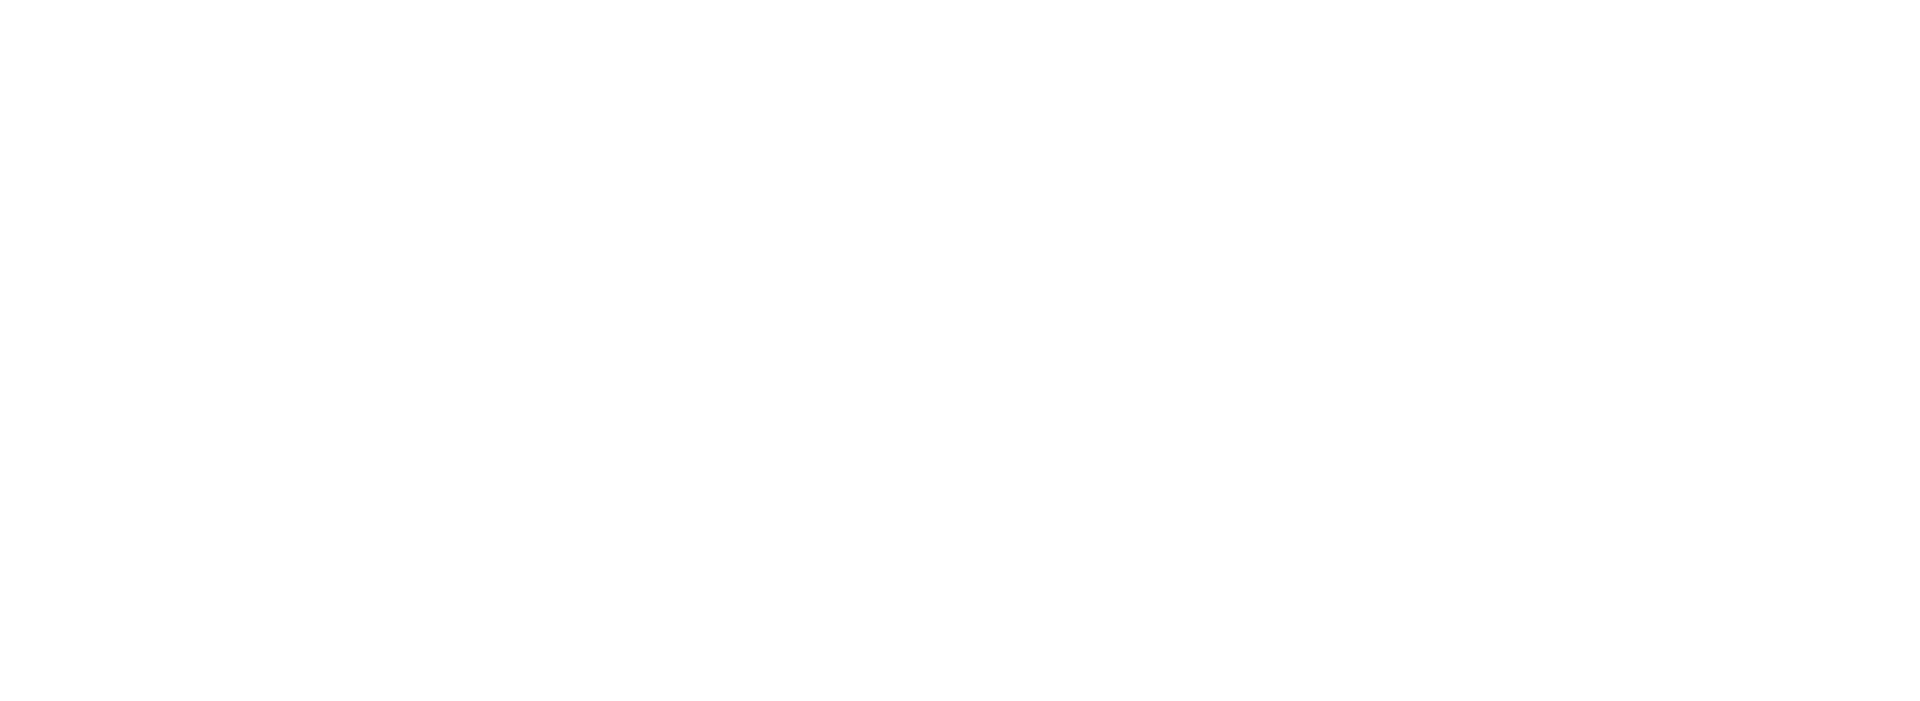 arcade machine drawing with texts denoting specs